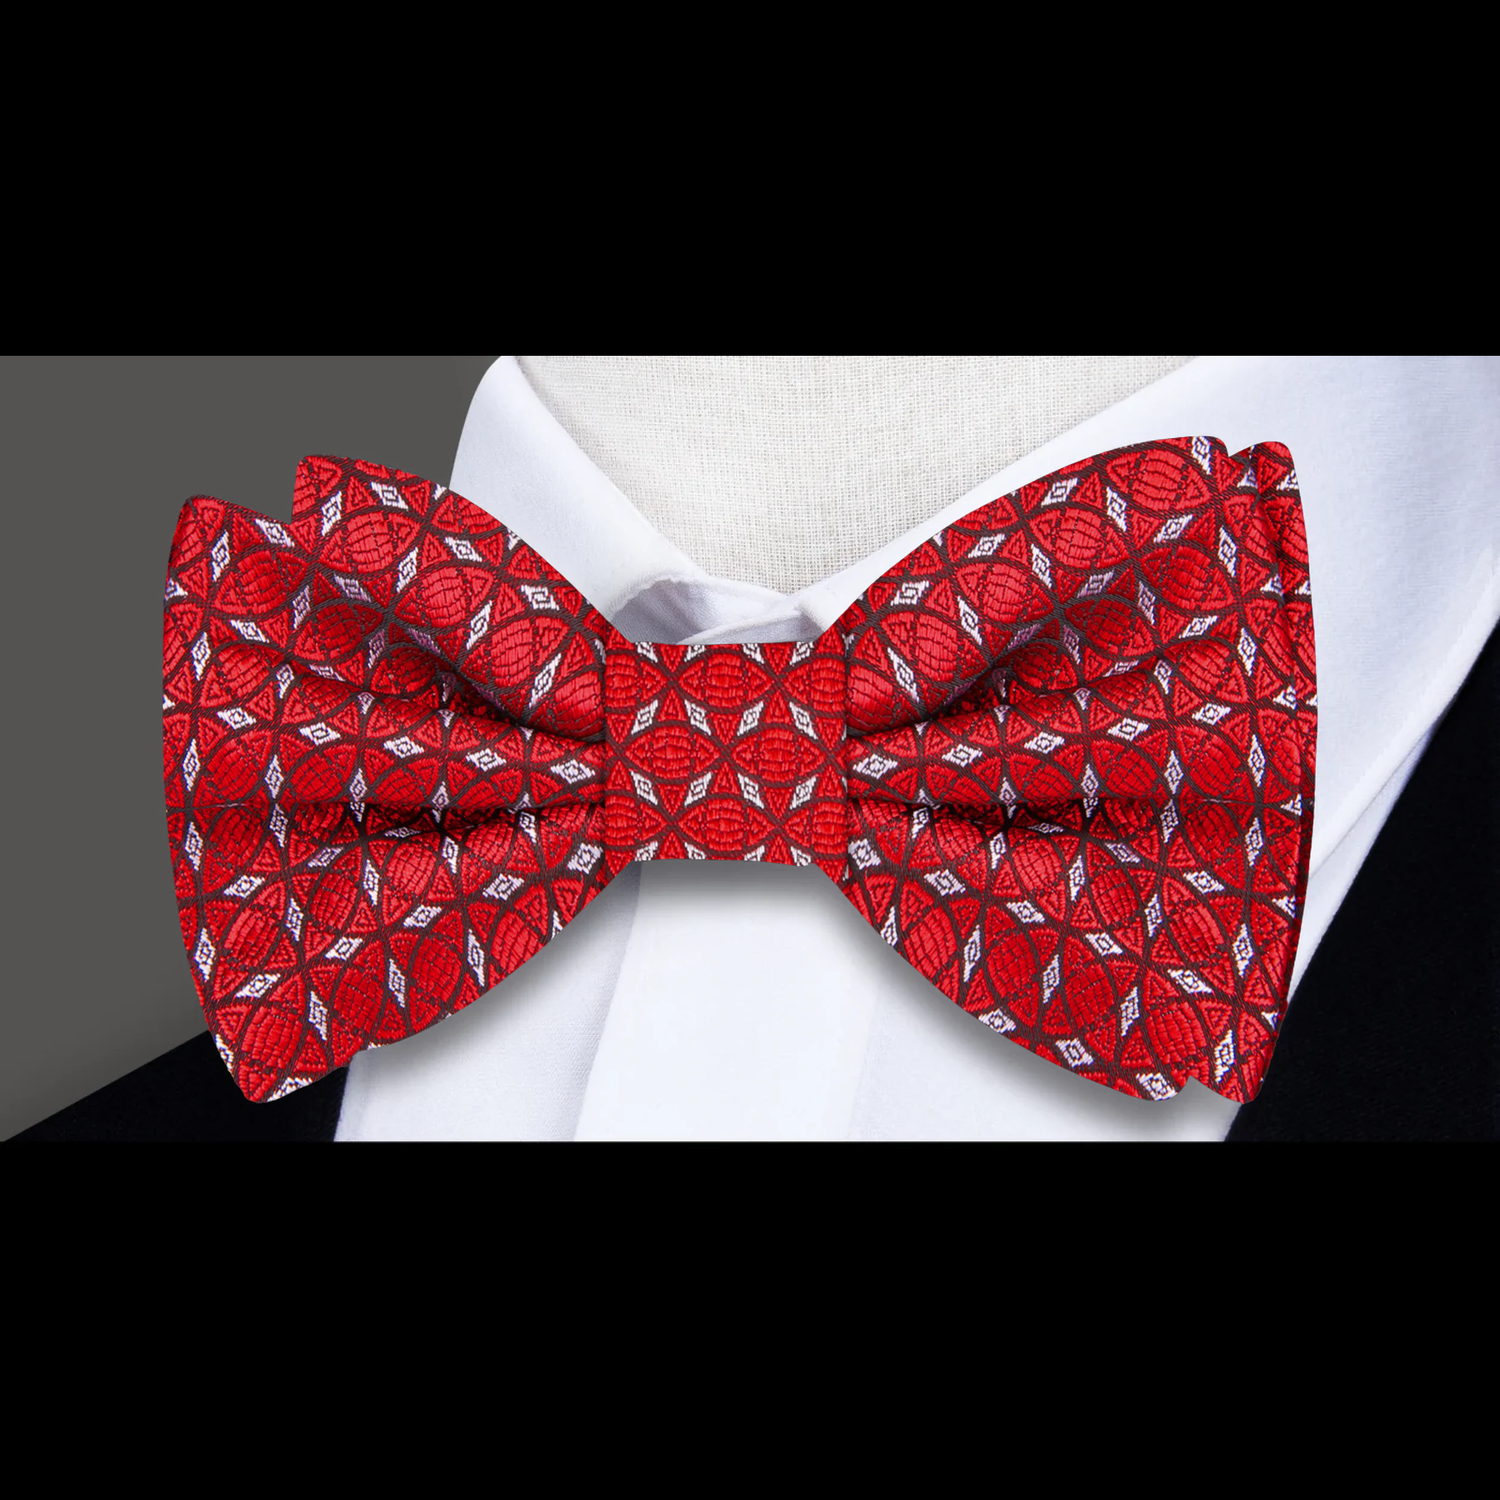 A Rich Red, Brown And Black Geometric Abstract Silk Bow Tie